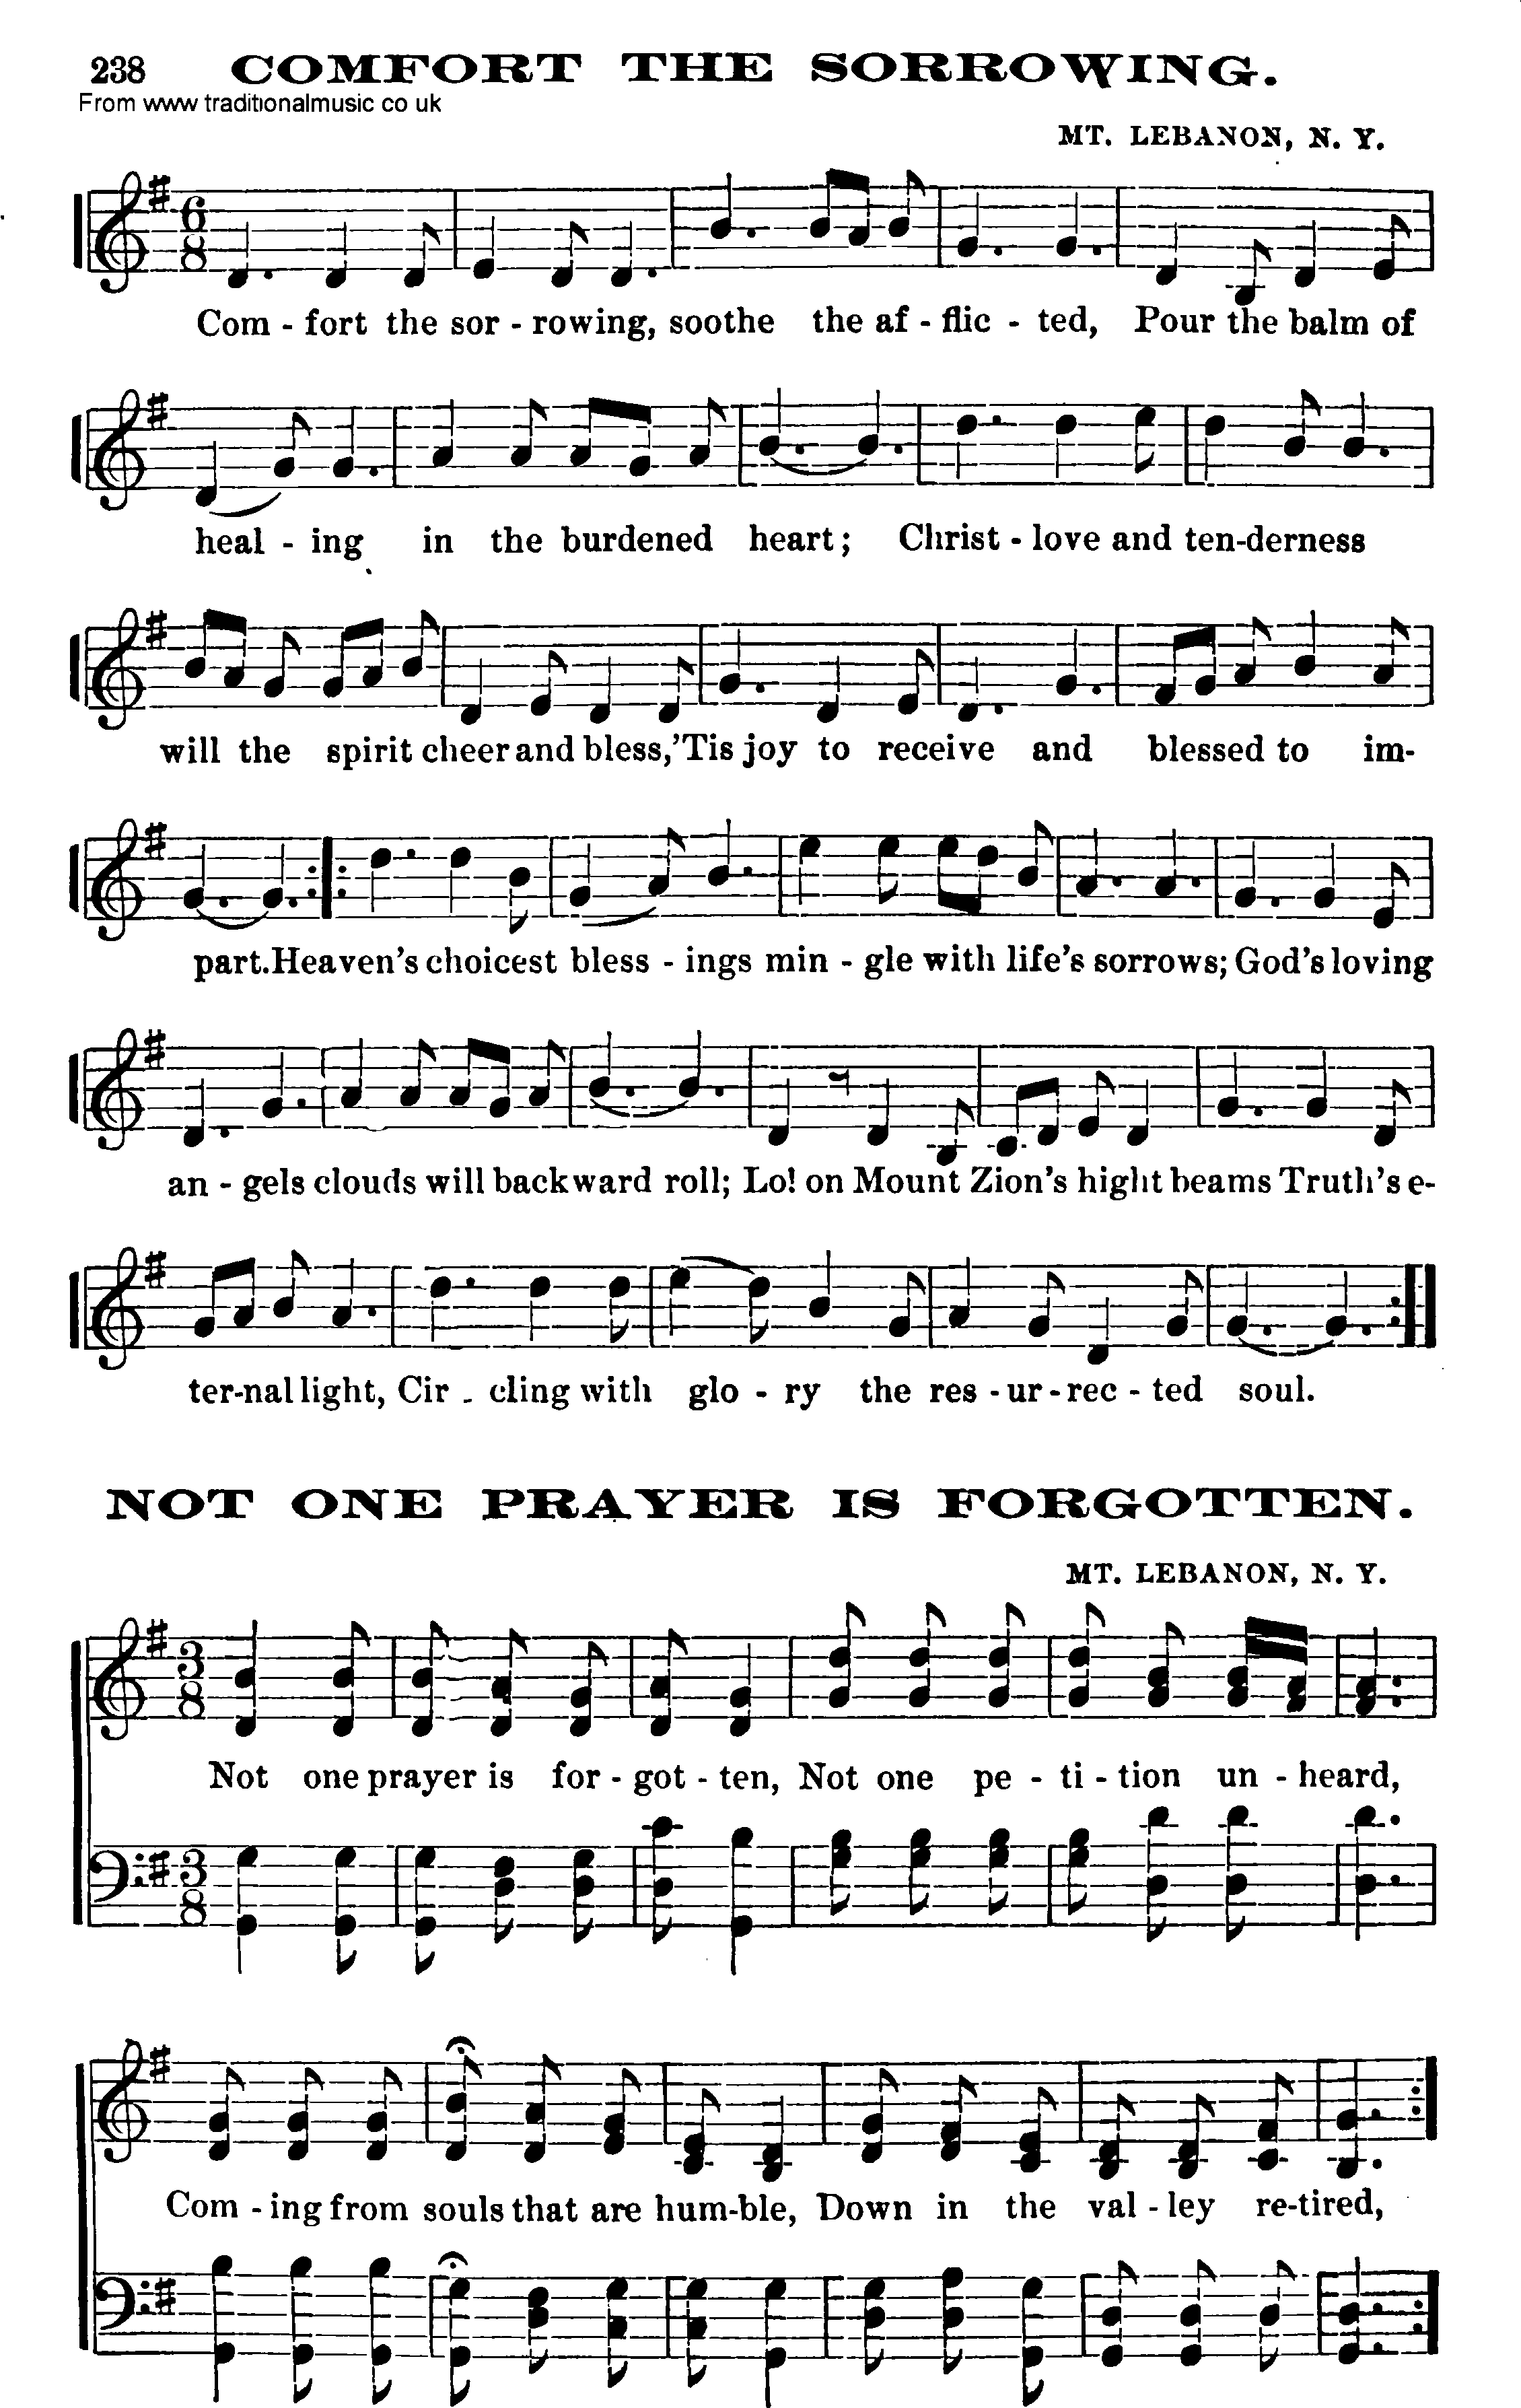 Shaker Music collection, Hymn: Comfort The Sorrowing, sheetmusic and PDF